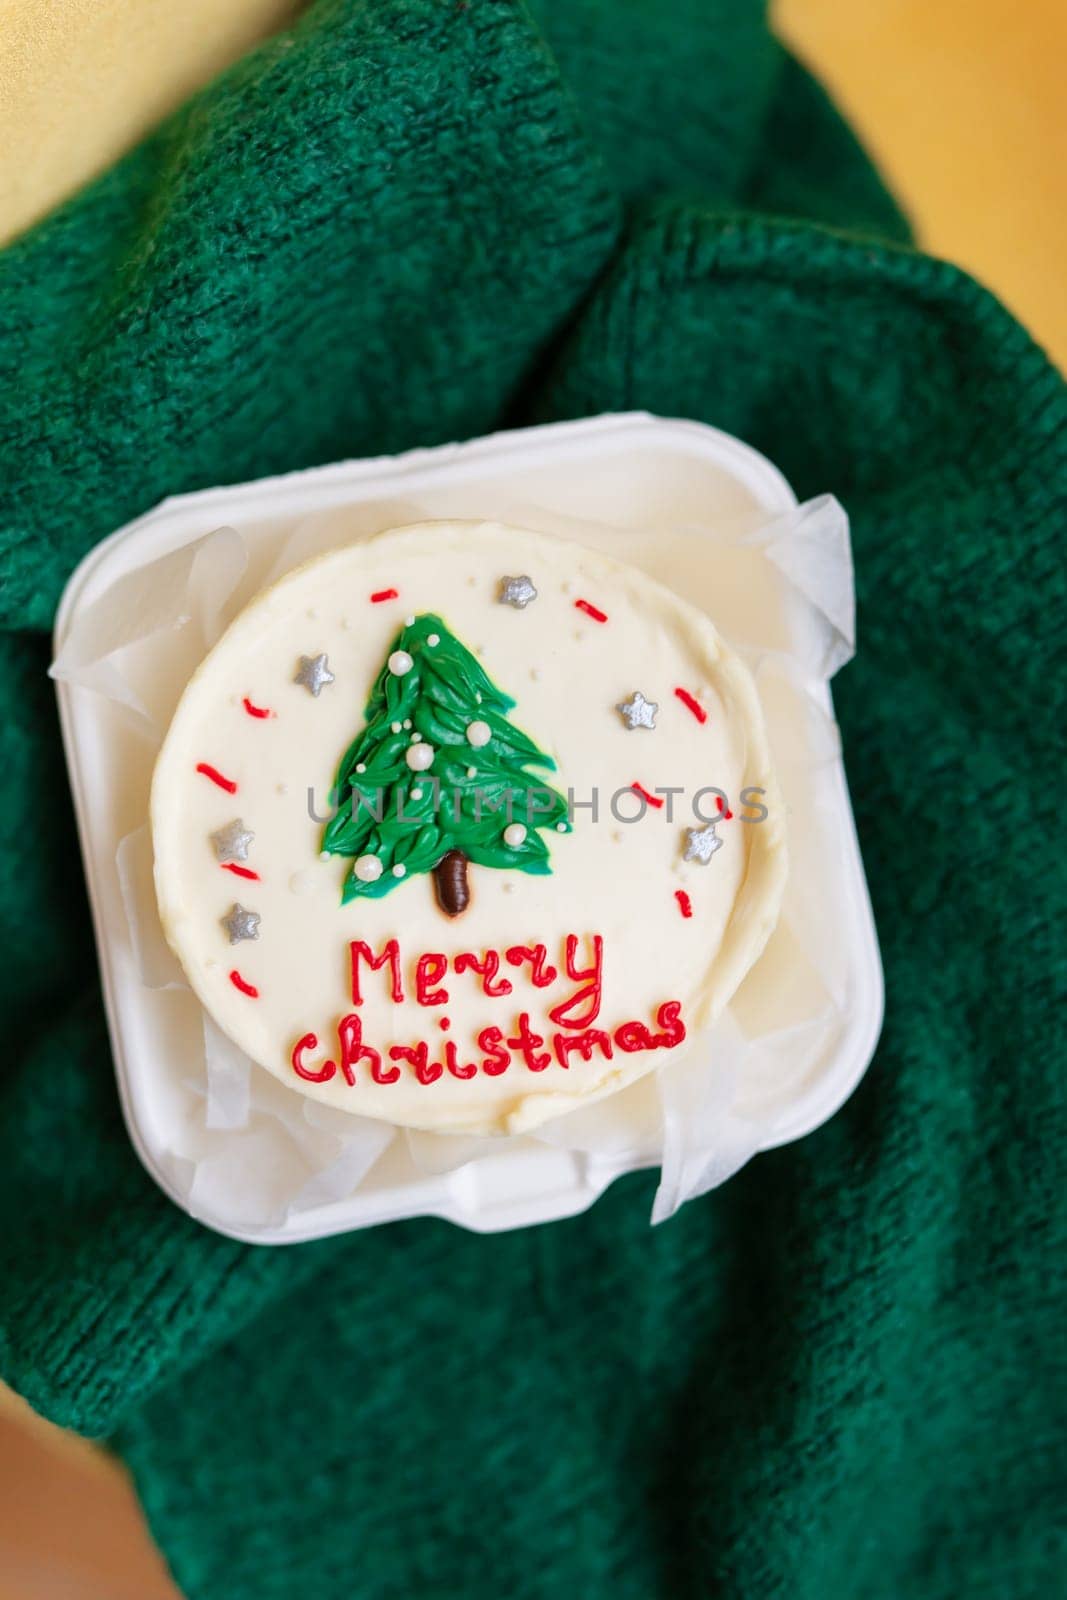 A festive Christmas cupcake with a green tree and red Merry Christmas text on a white frosting. by sfinks